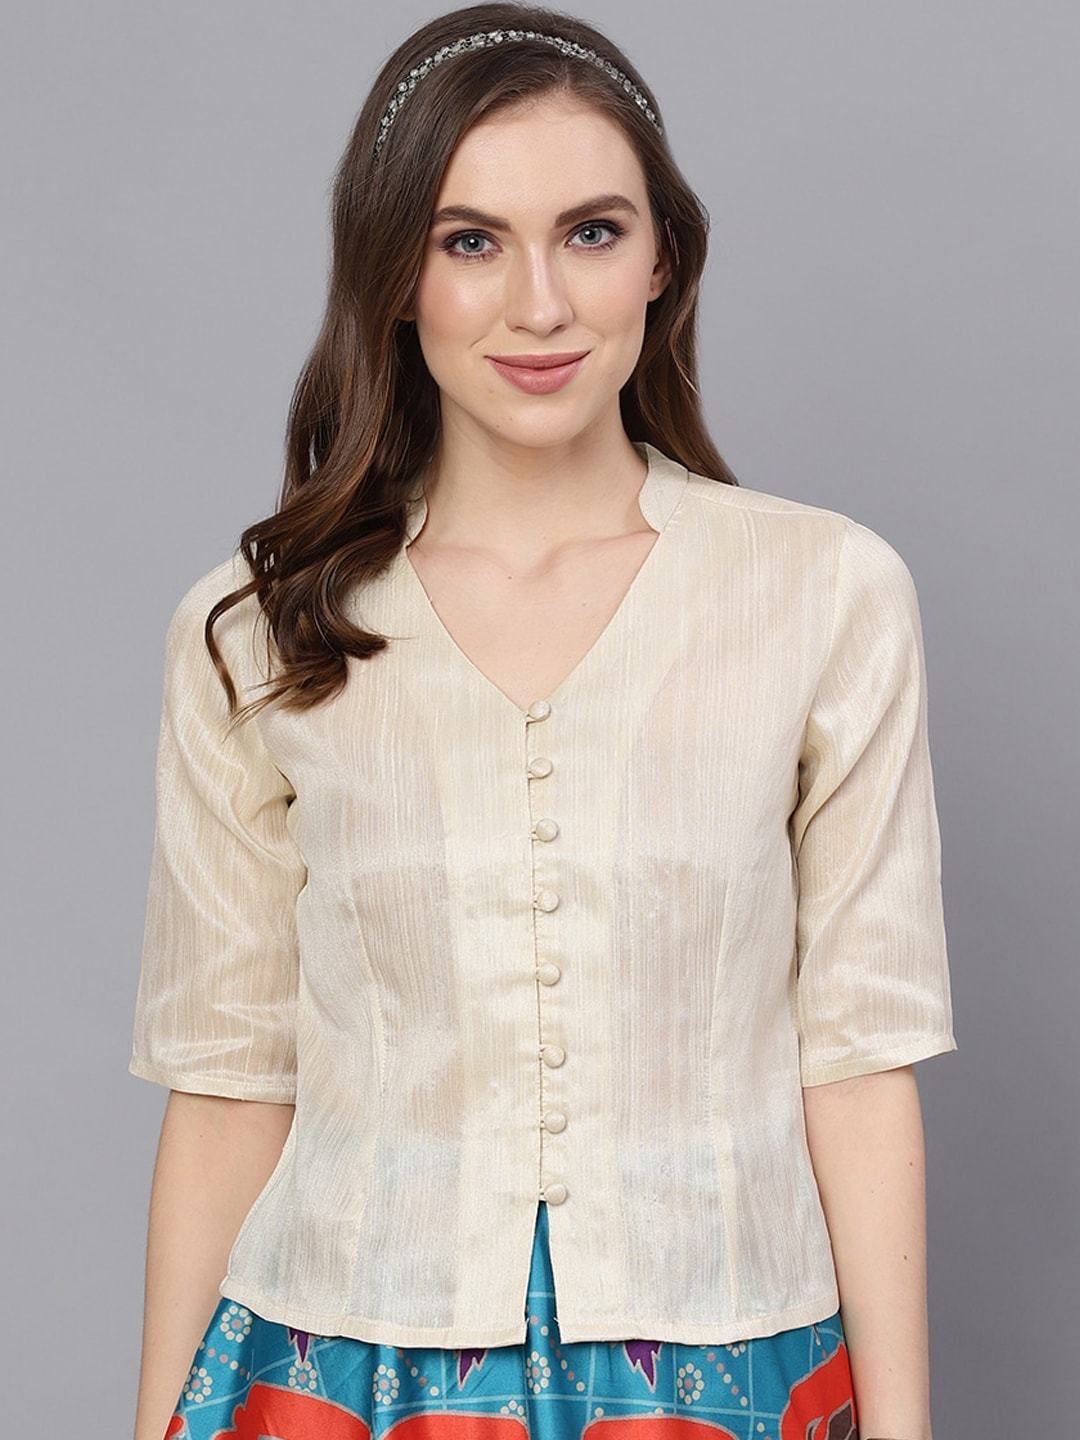 Women's Cream-Coloured Solid Shirt Style Top - AKS